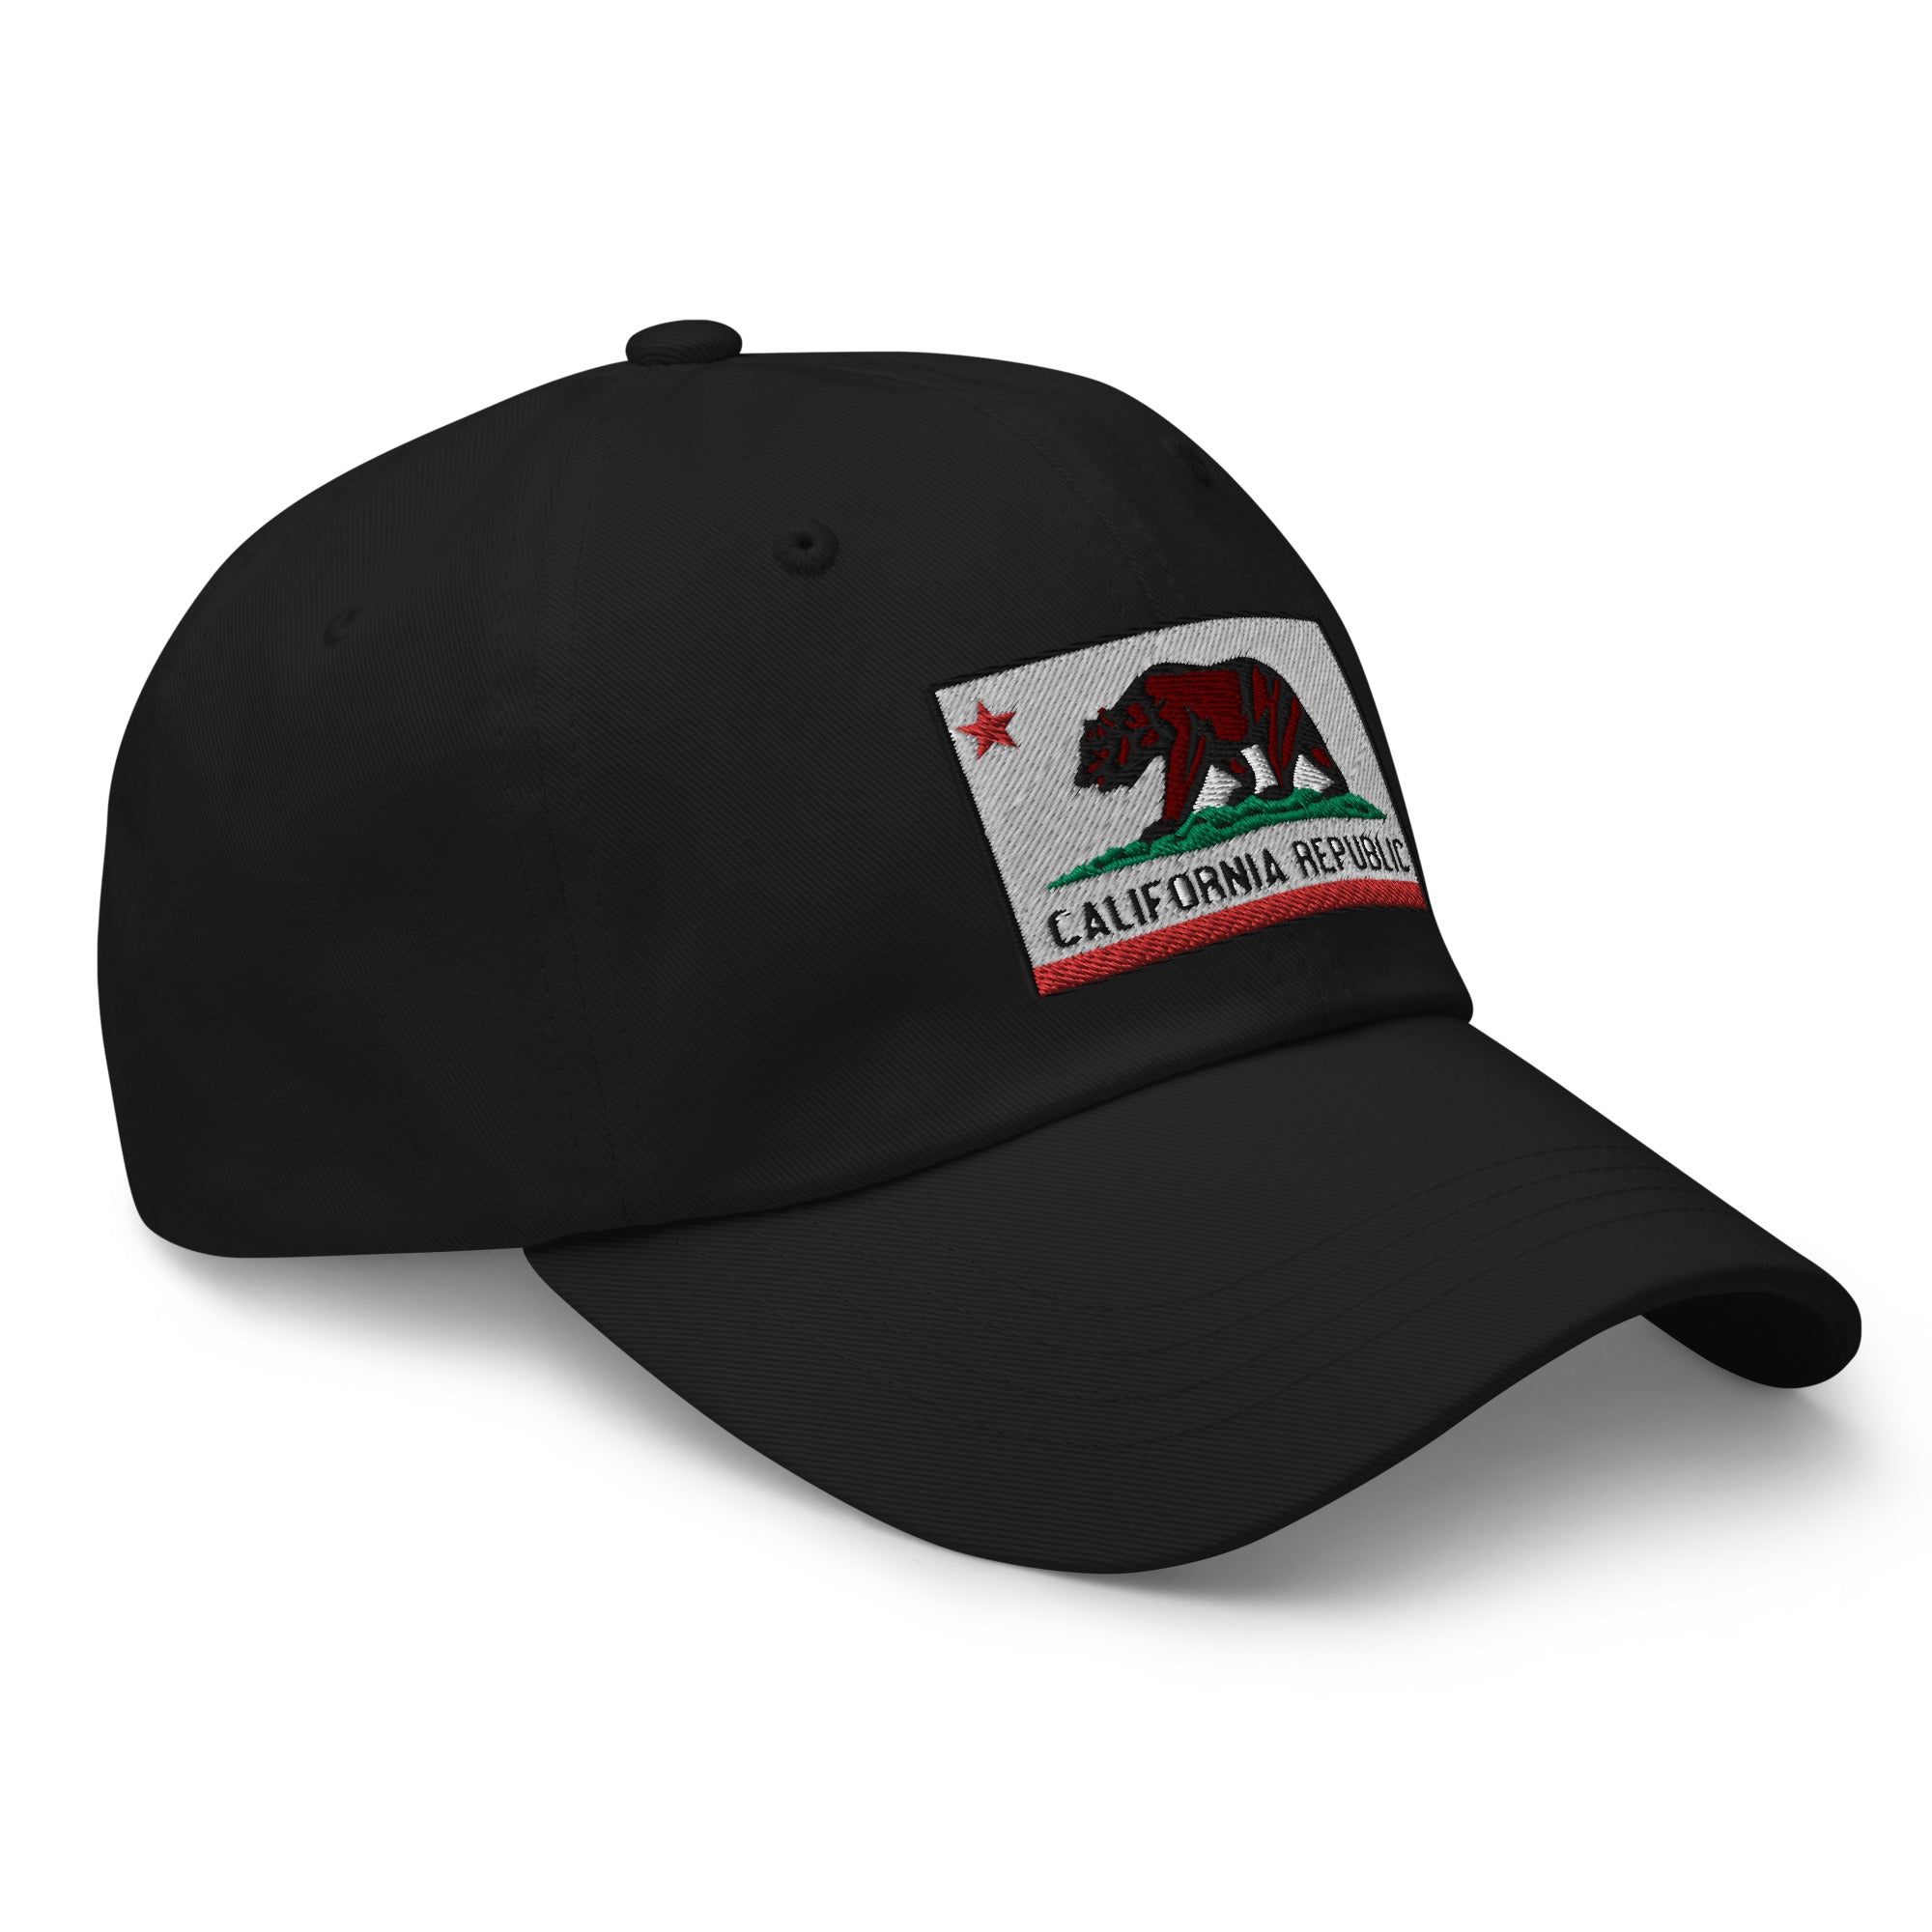 California U.S. State Flag Embroidered Baseball Cap Dad hat - Edge of Life Designs